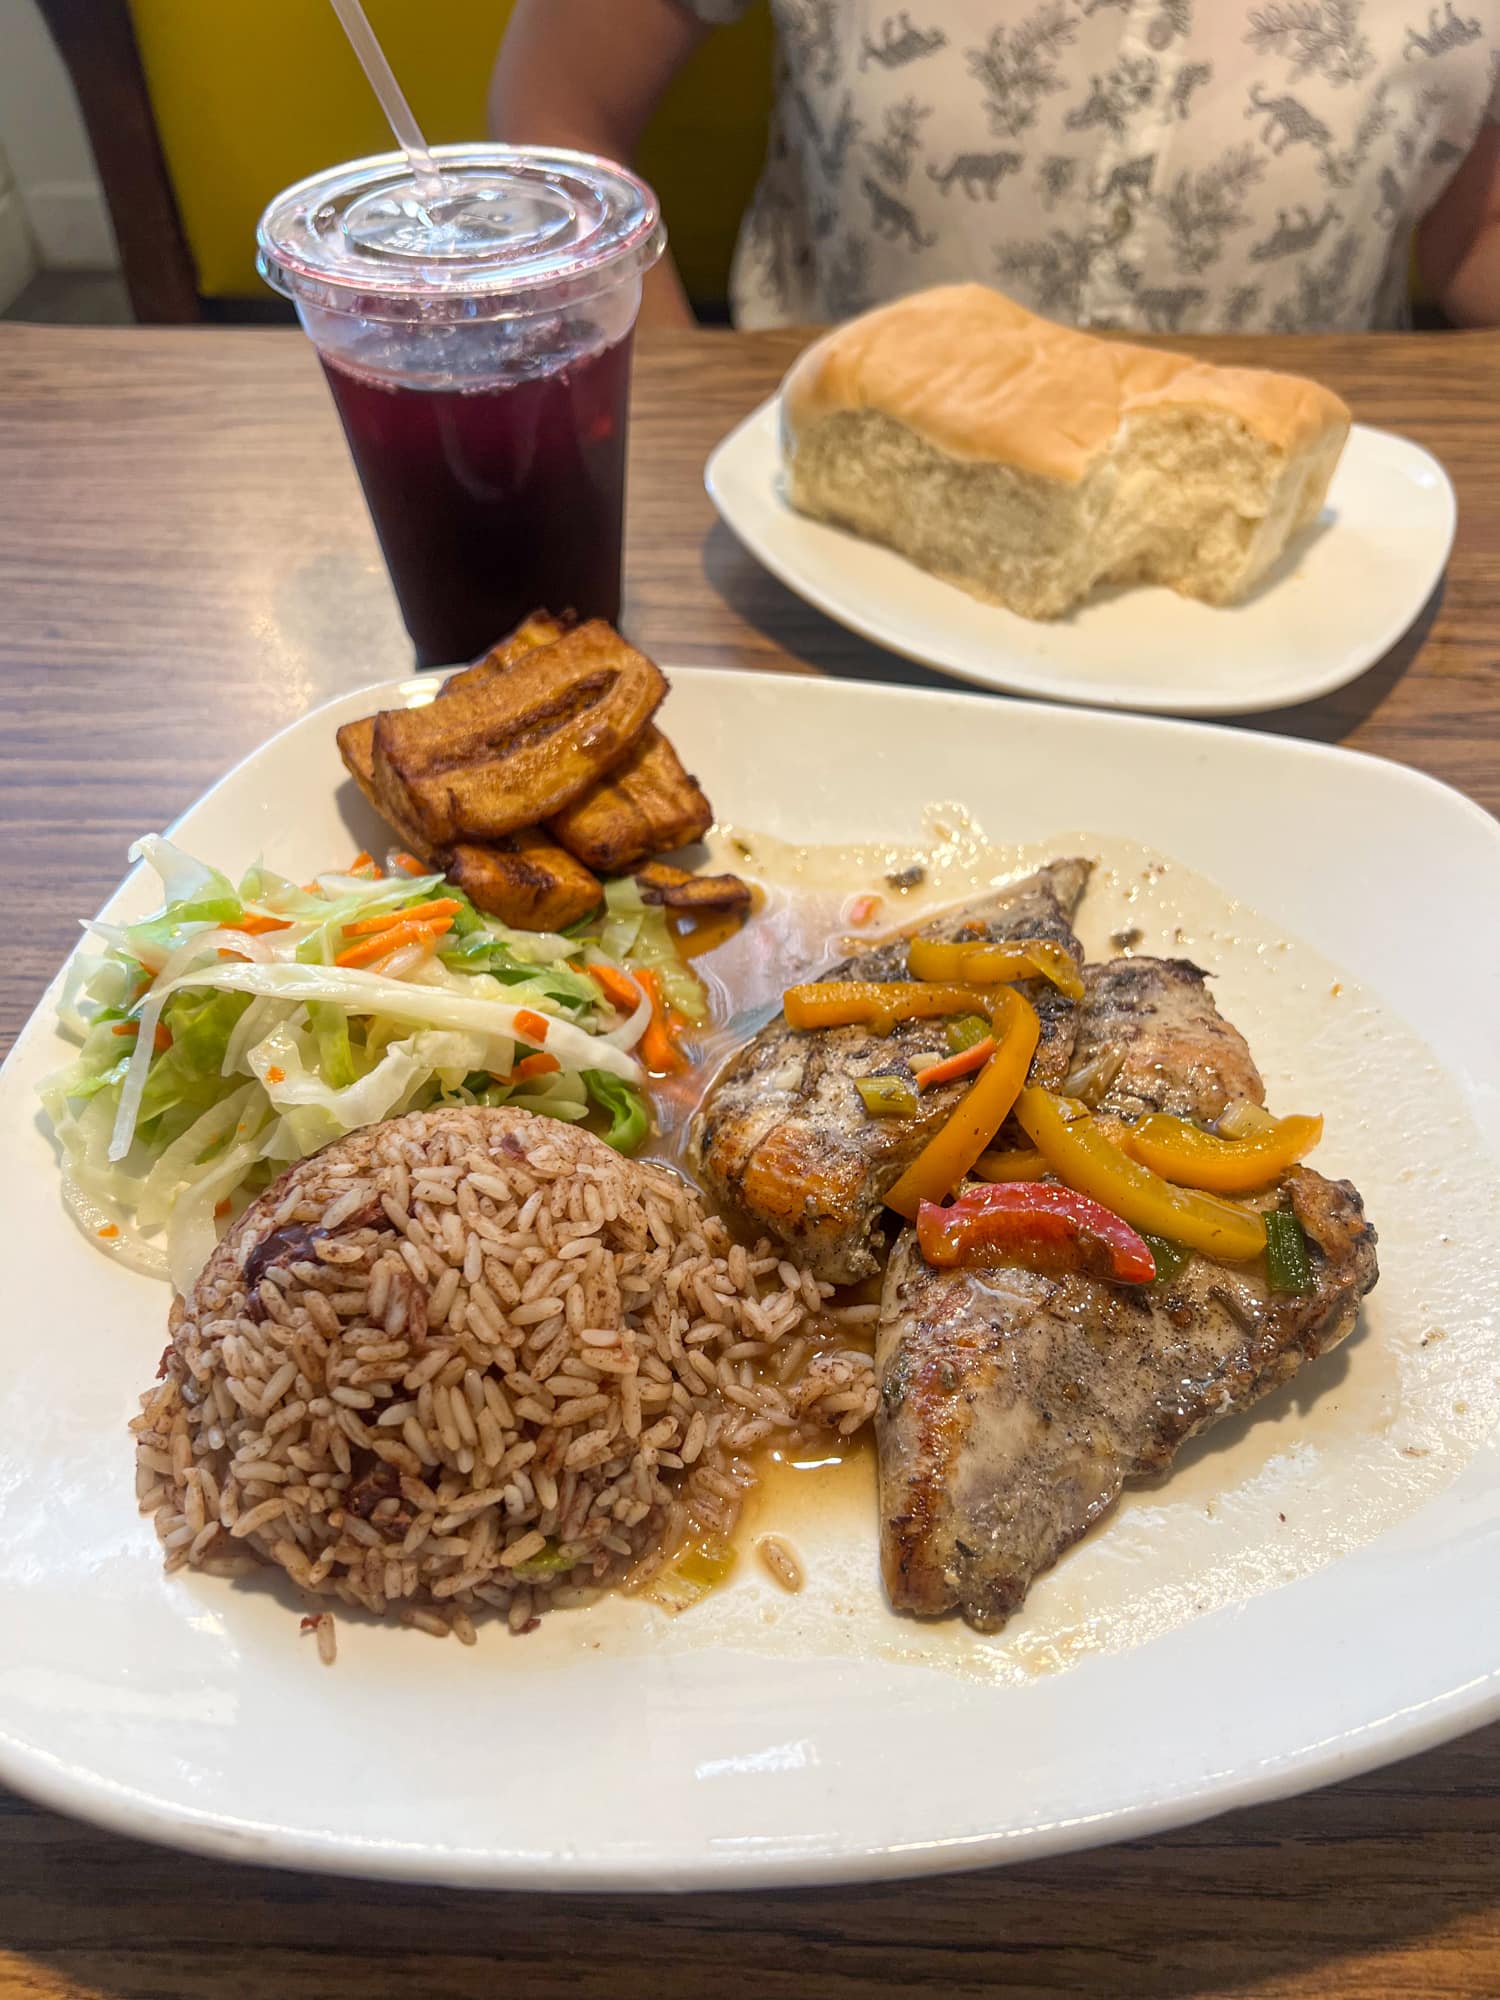 Jerk chicken breast with rice and beans and sweet plantains